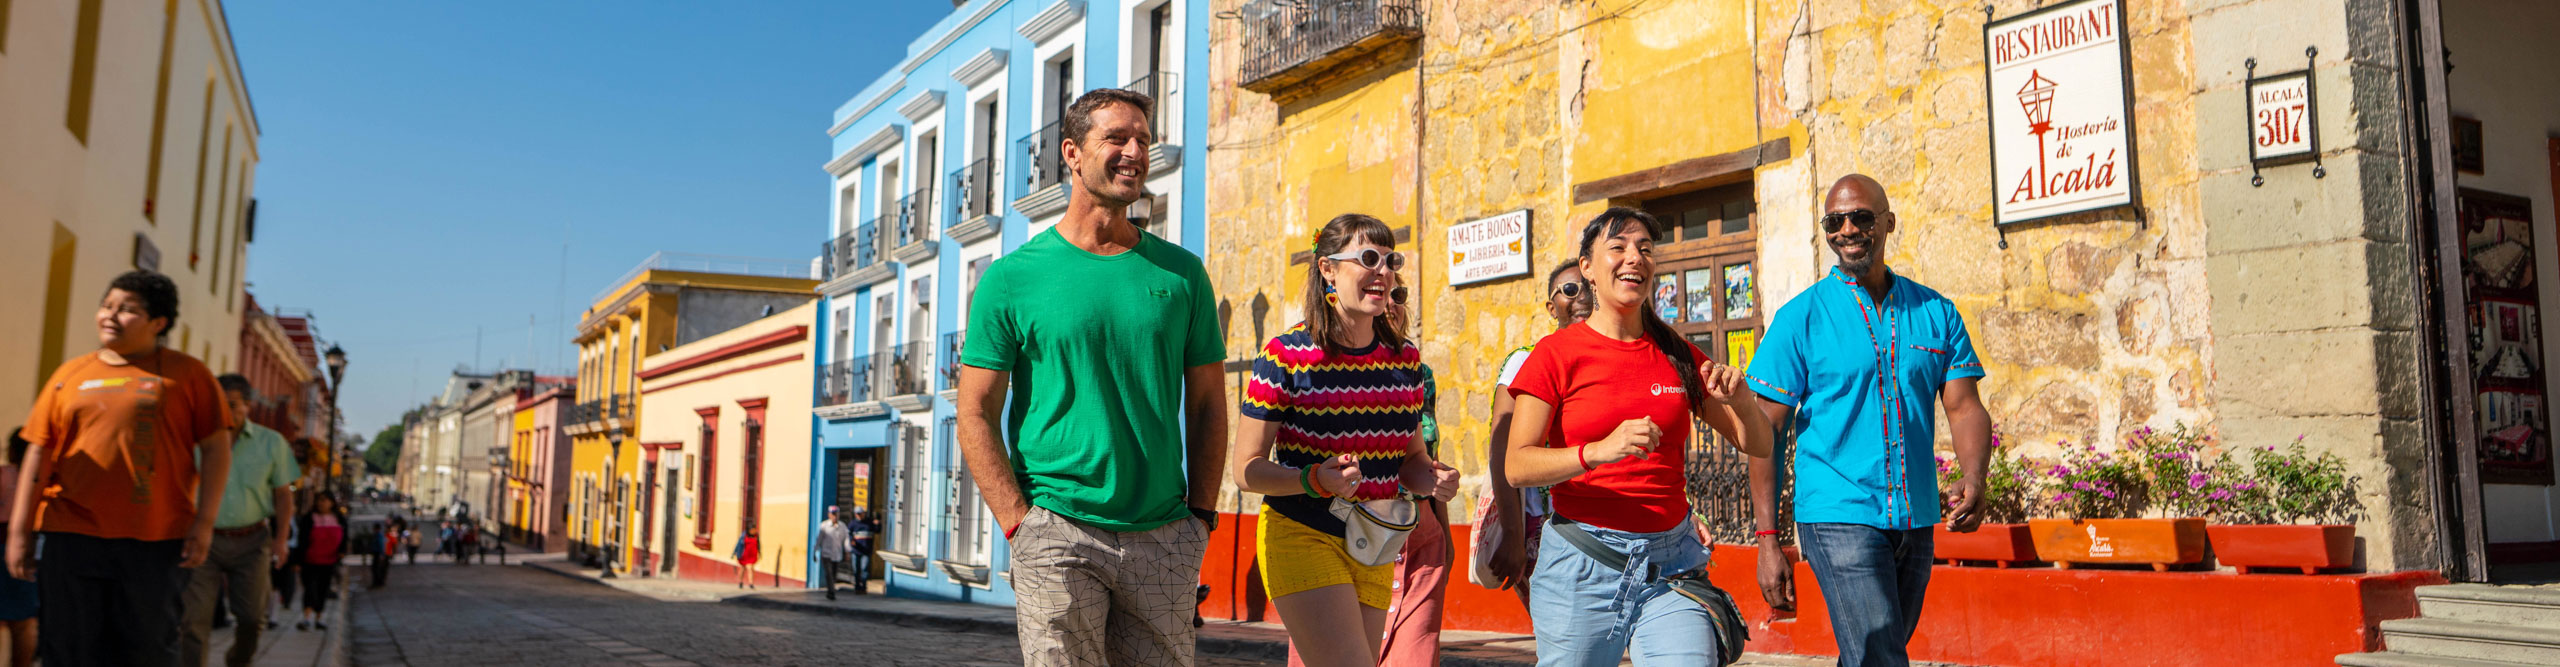 travellers walking down the street with colourful buildings in Mexico on a sunny day